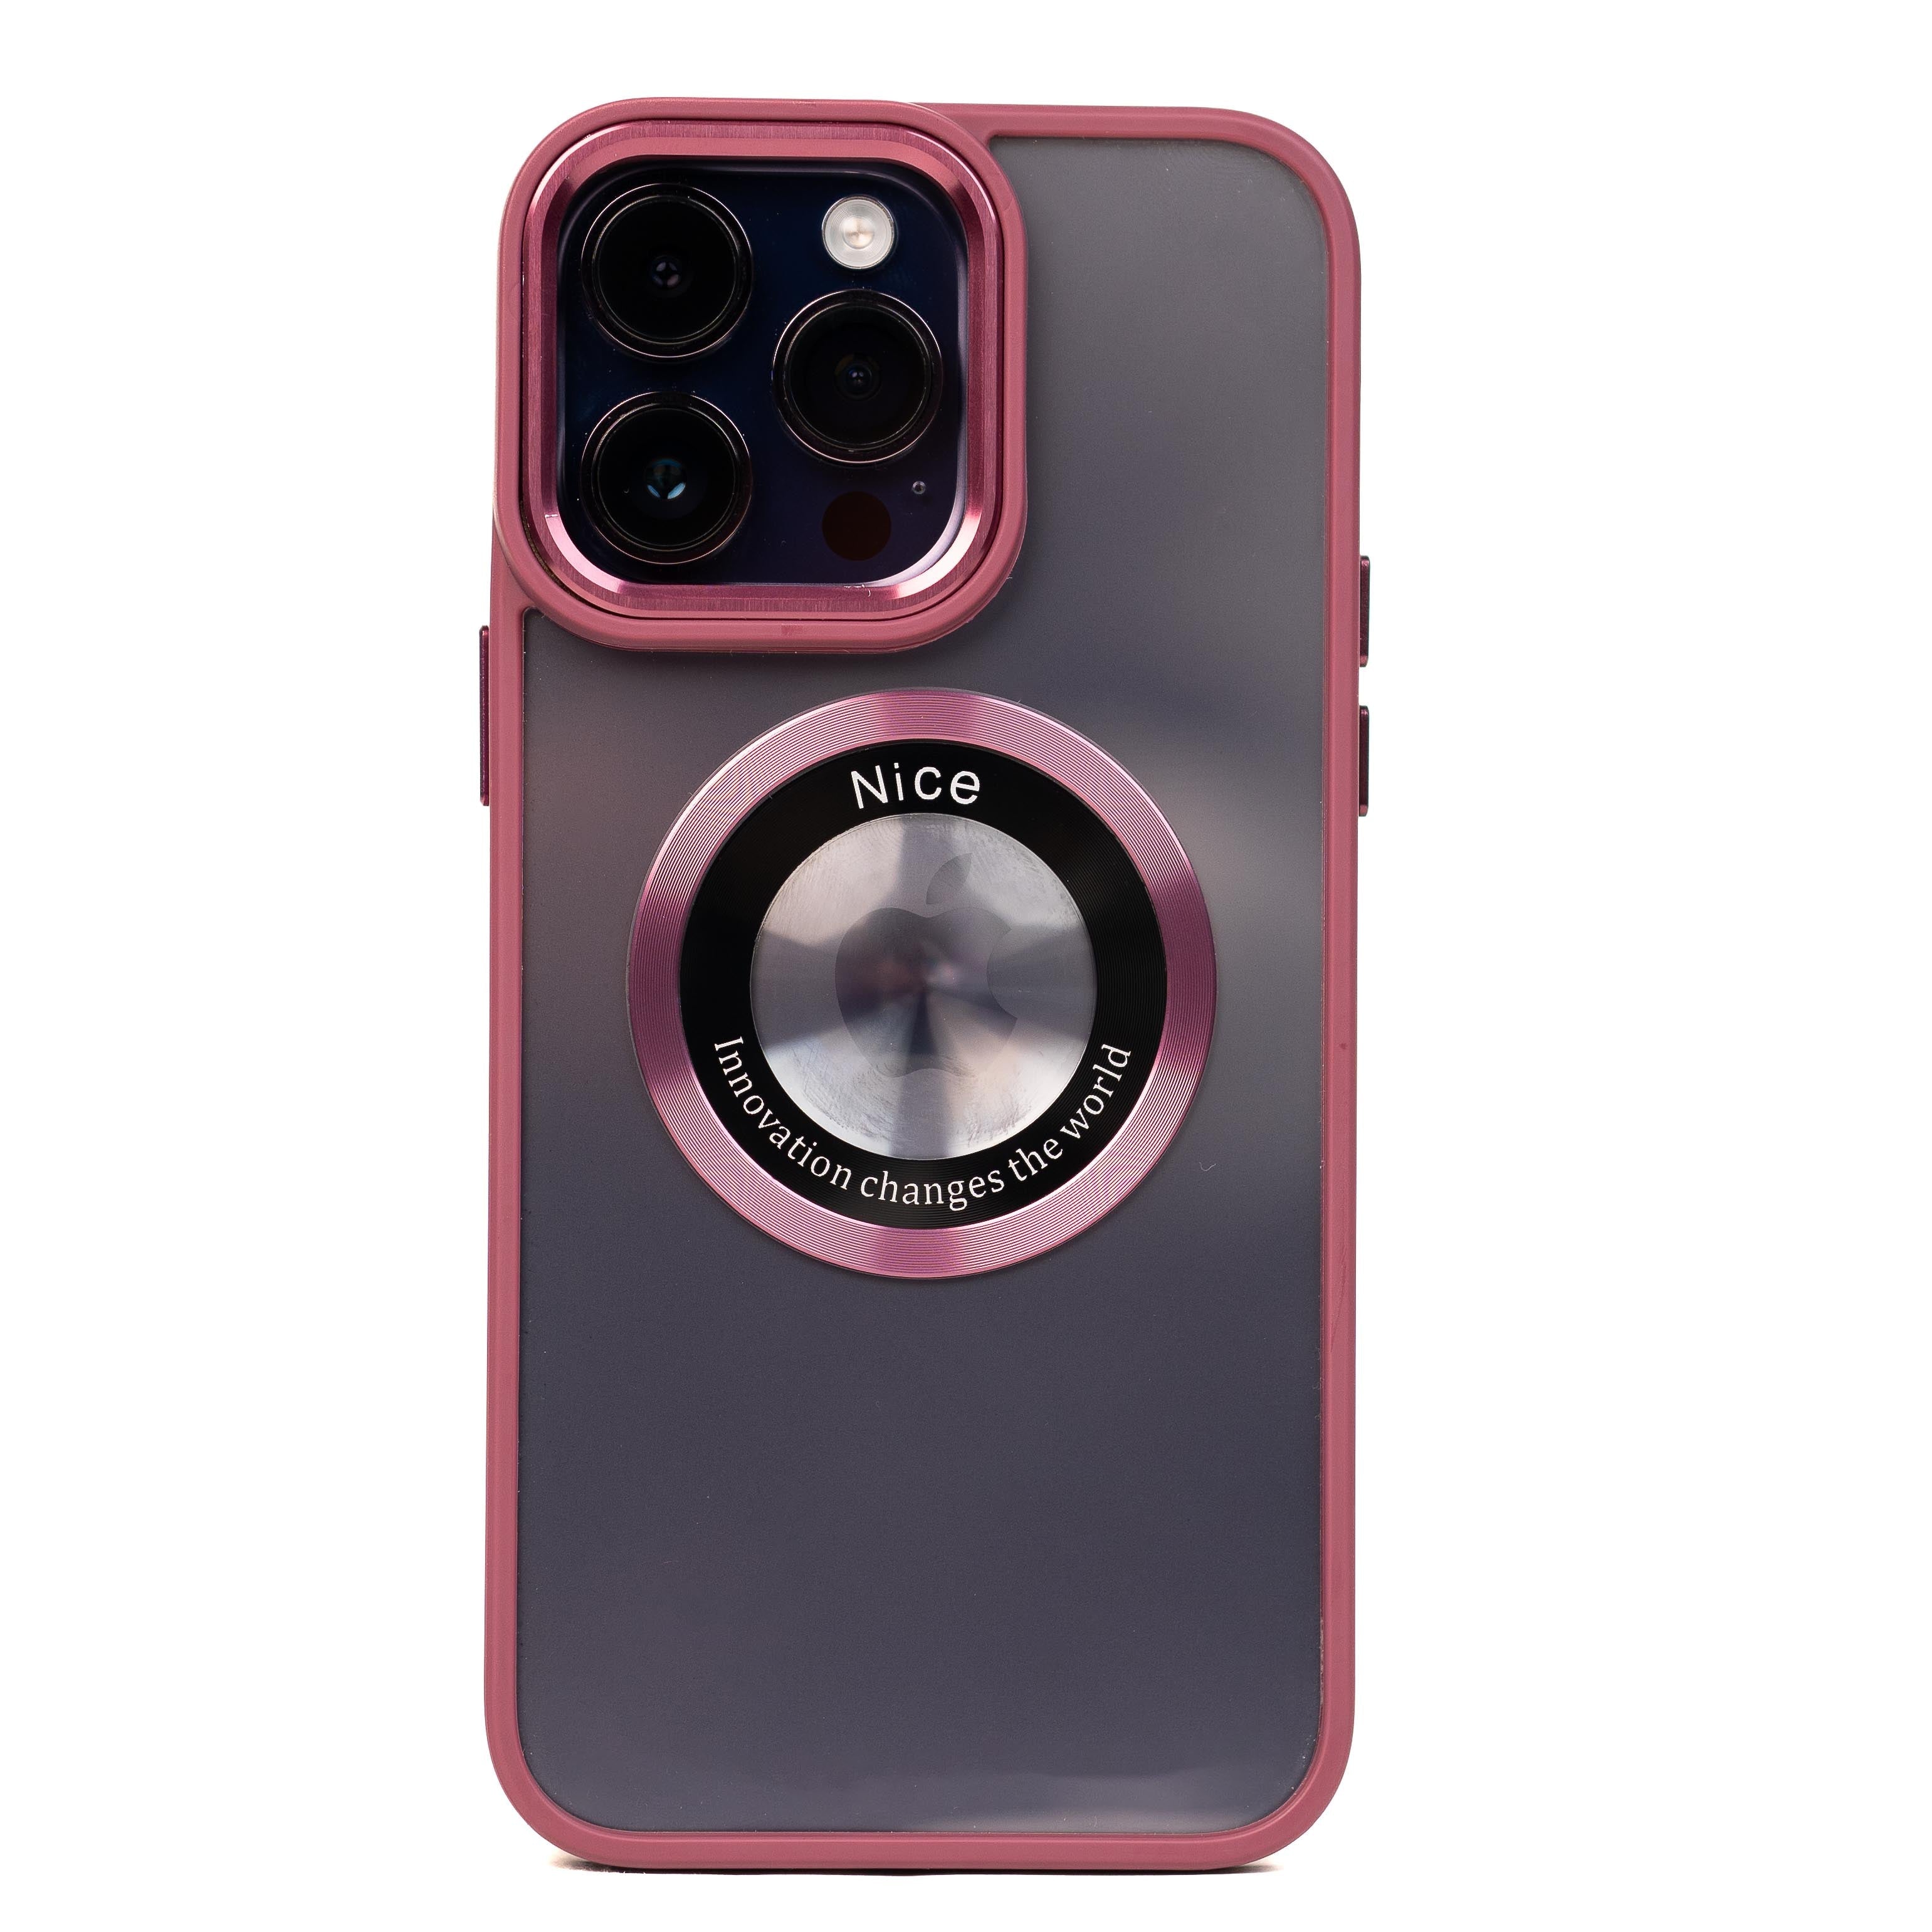 Clarify Color Frame Case iPhone 11 Pro Max Three store